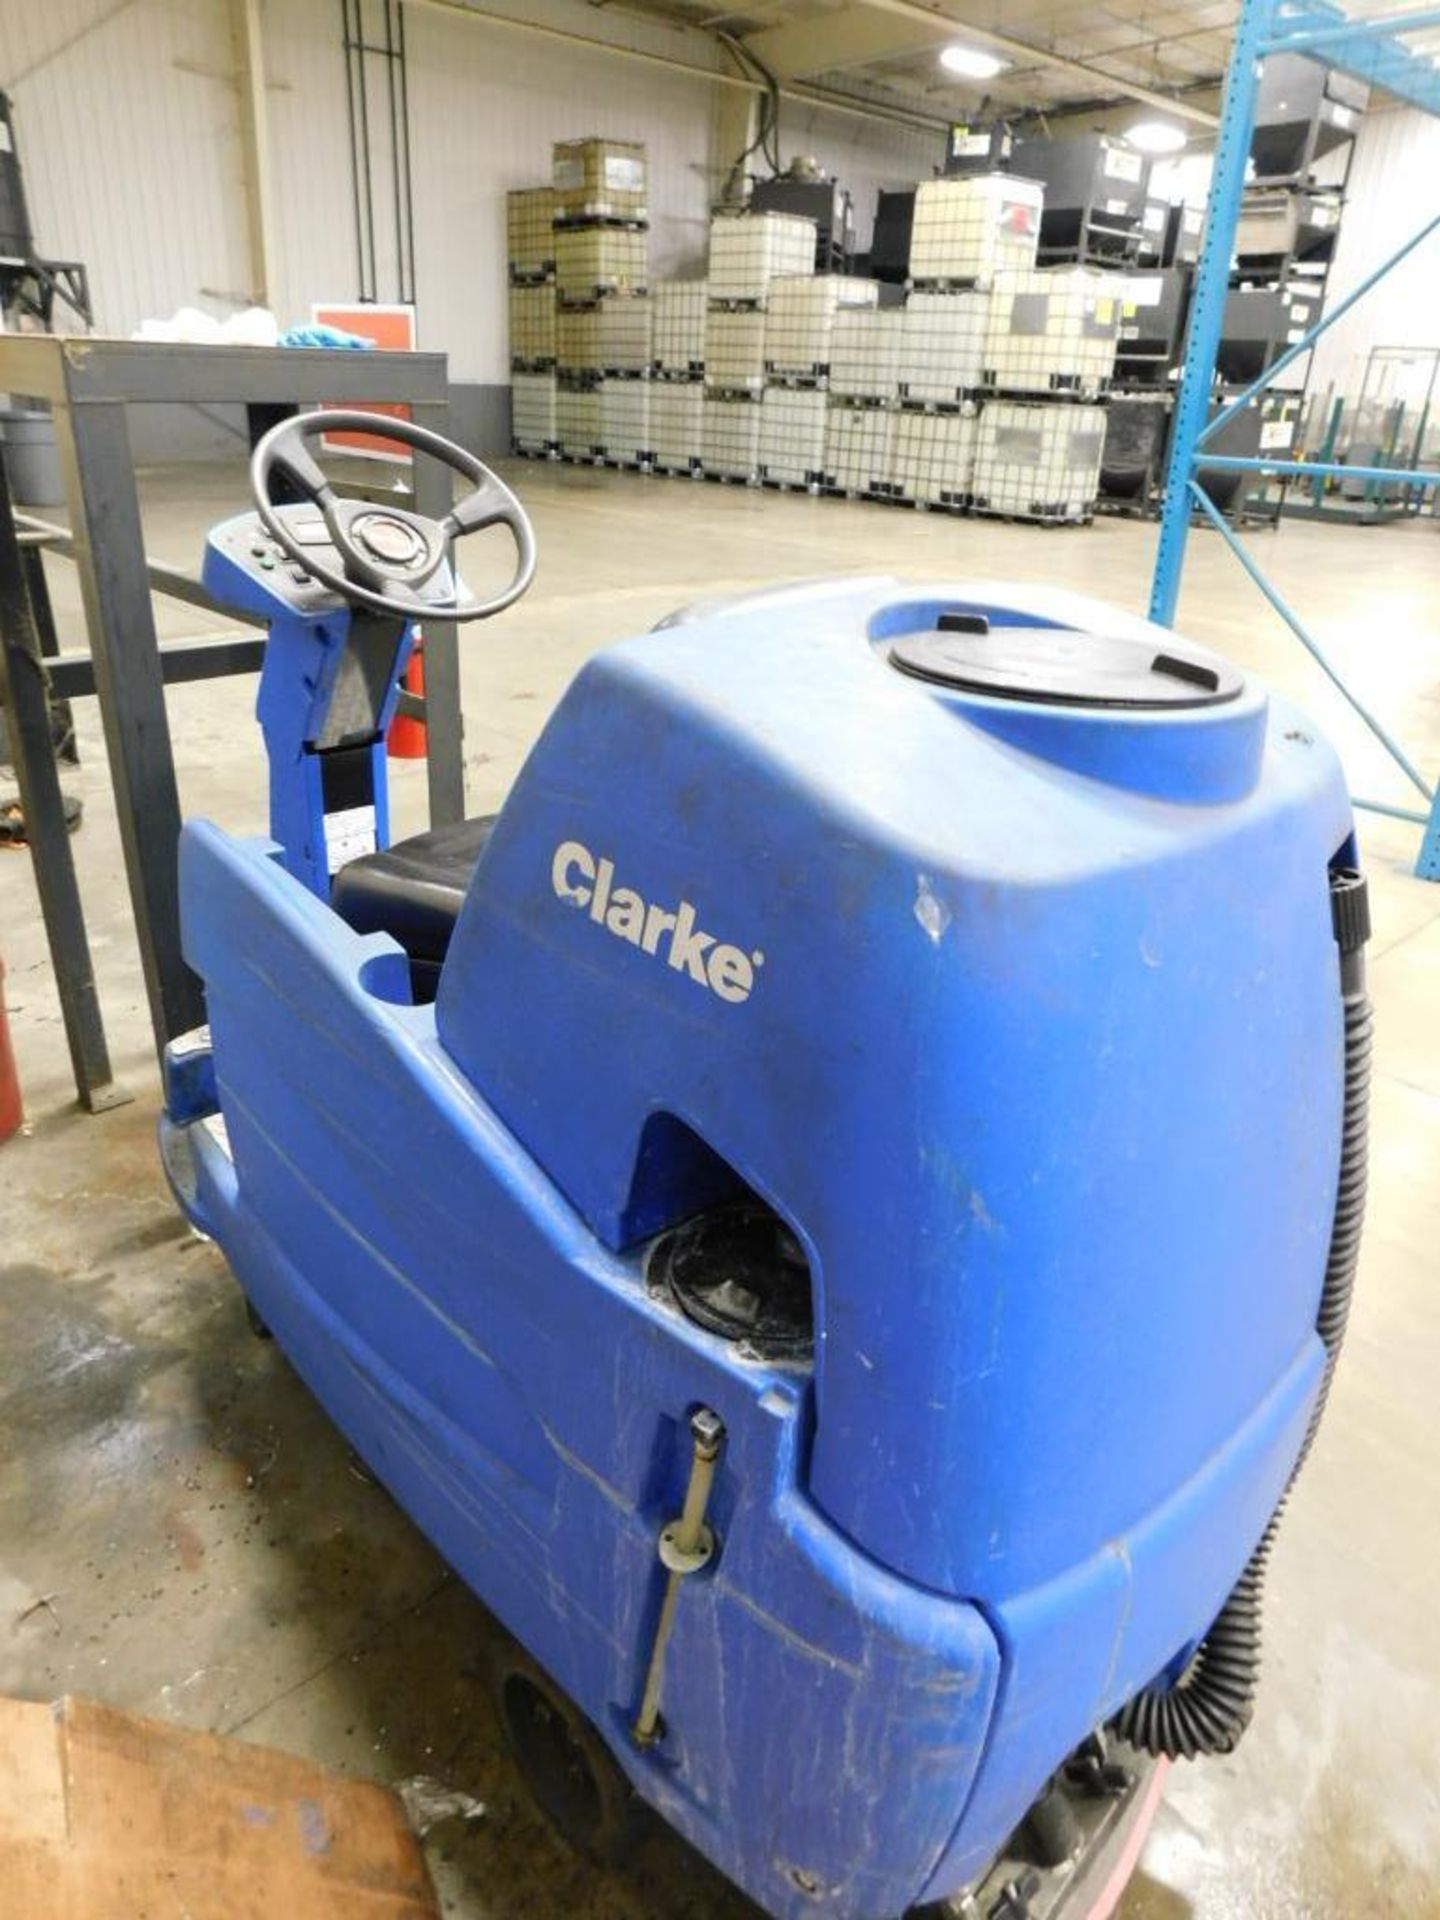 Clarke Focus 34 Floor Scrubber, 34" Wide, Ride On Type, Battery Powered, On Board Charger, S/N 30001 - Image 2 of 5